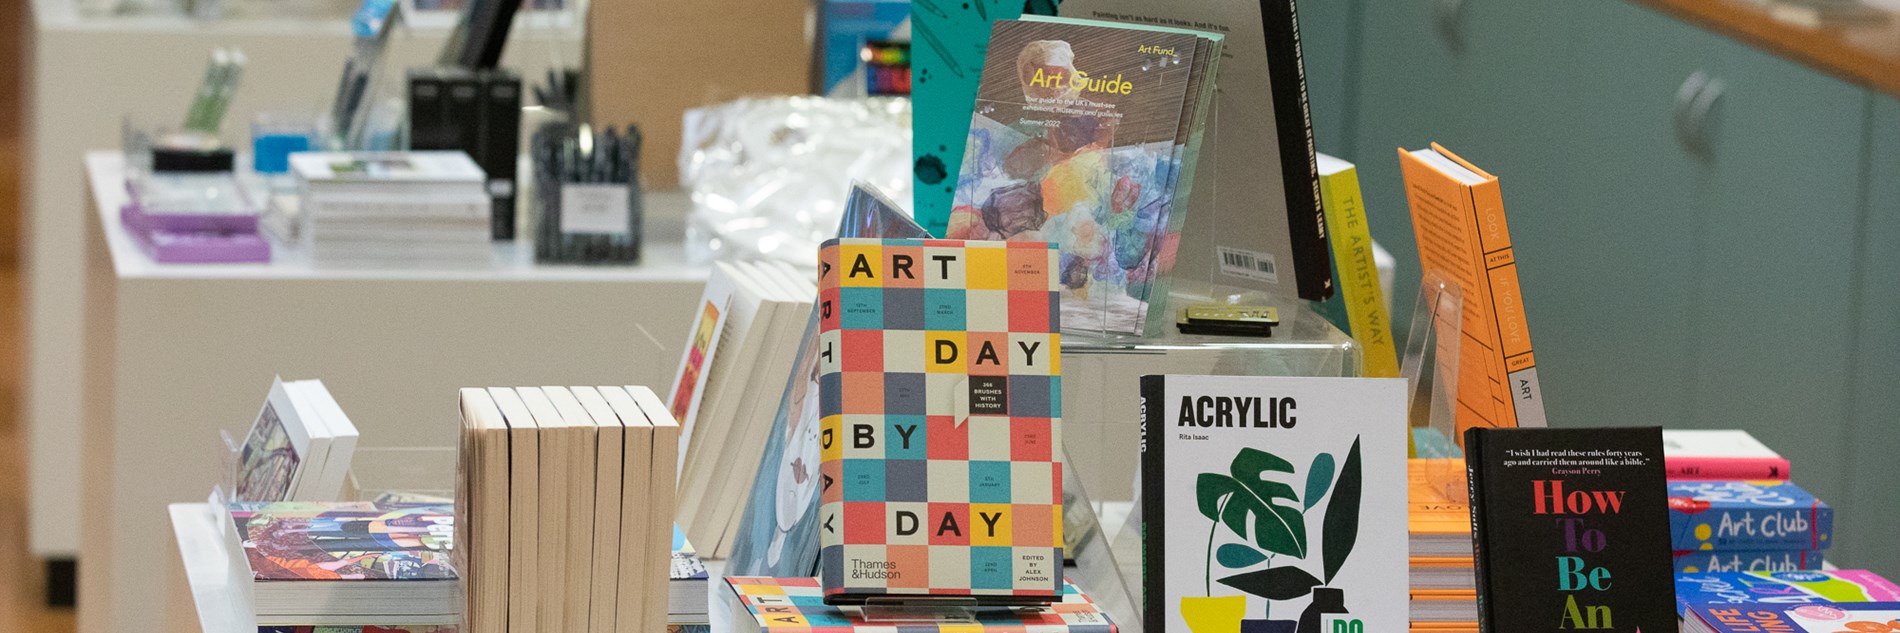 A museum shop display of art books and stationery items